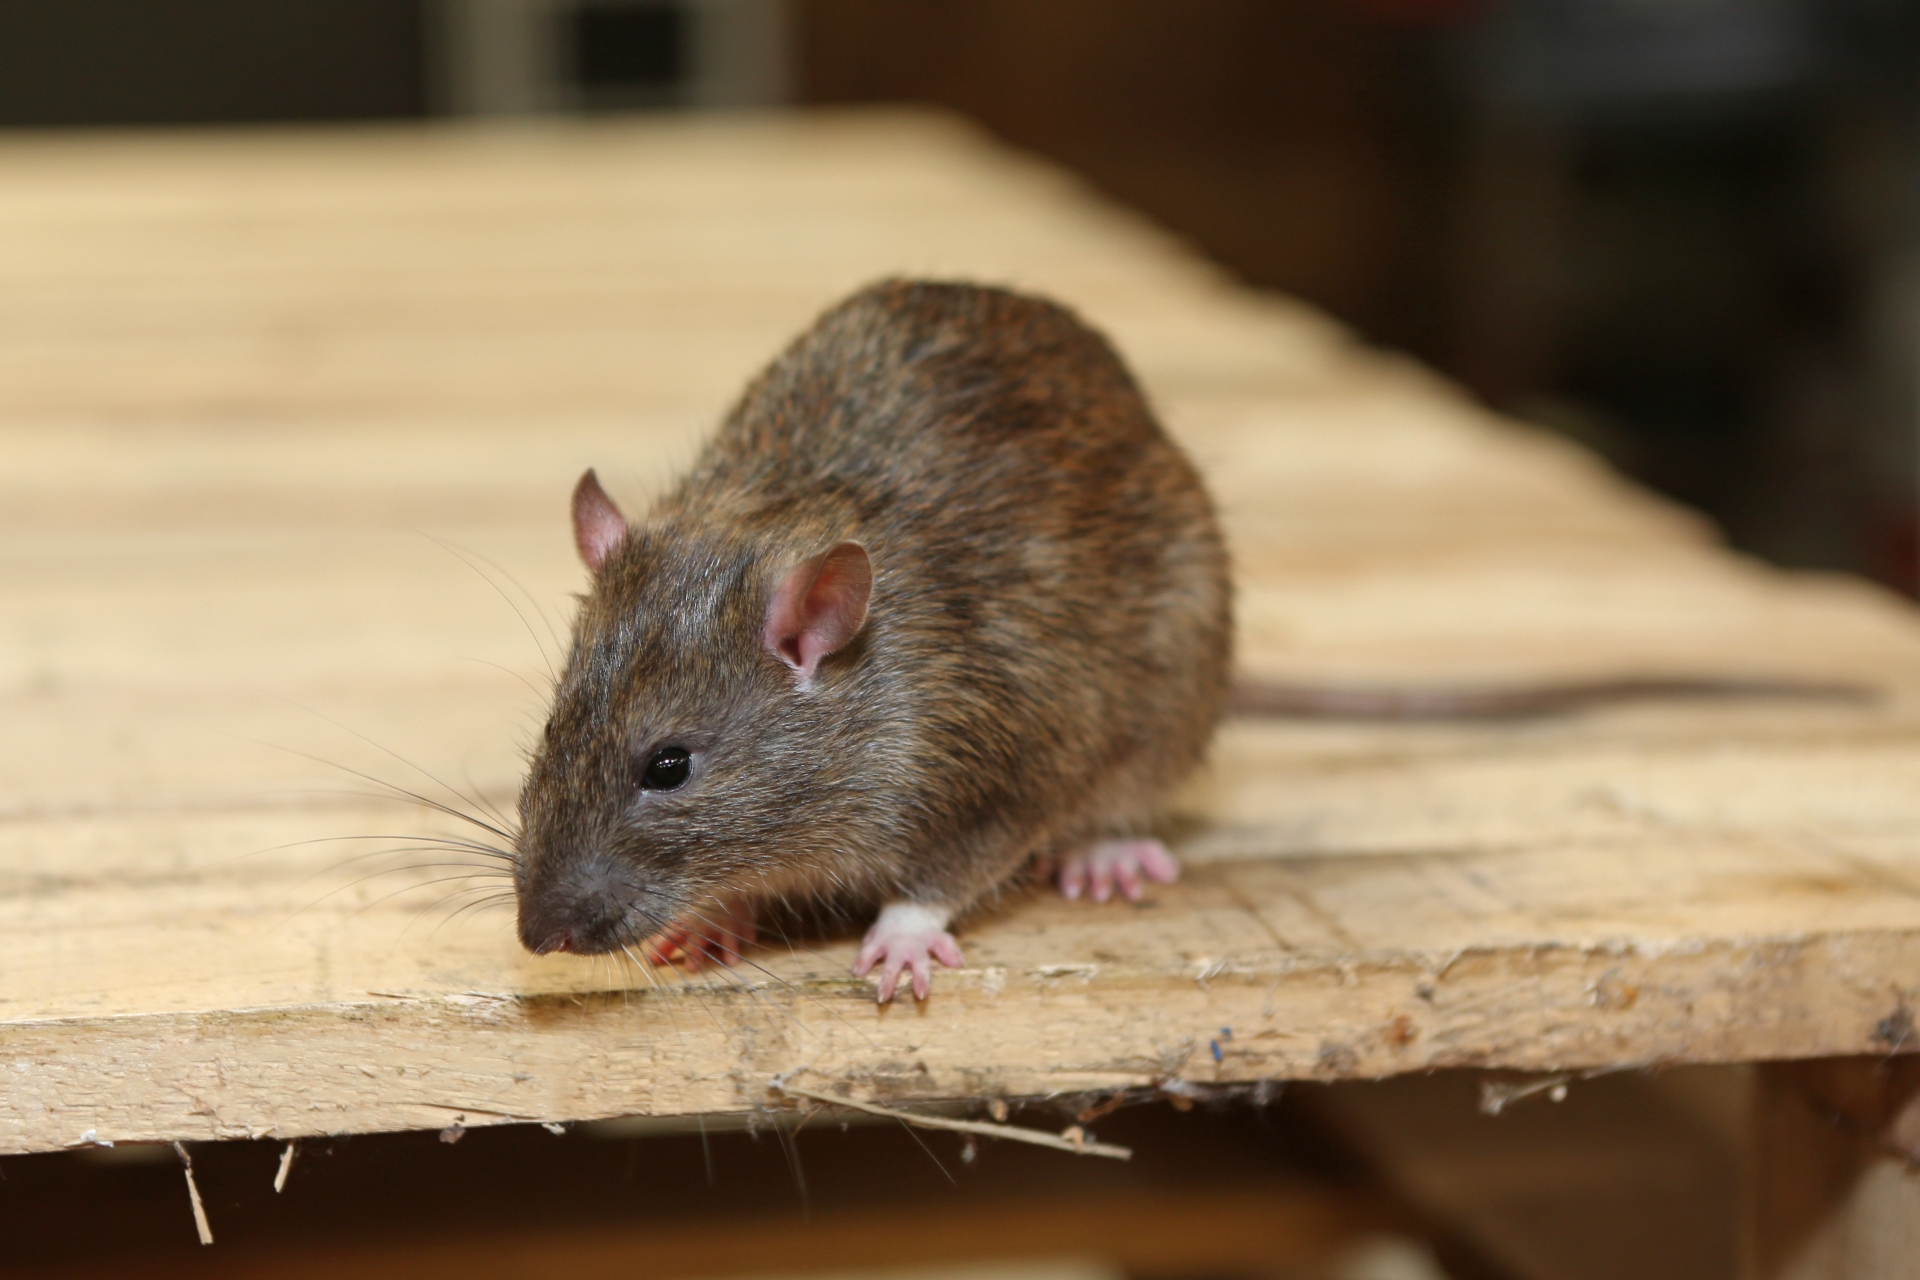 Rat Control, Pest Control in Finsbury Park, Manor House, N4. Call Now 020 8166 9746